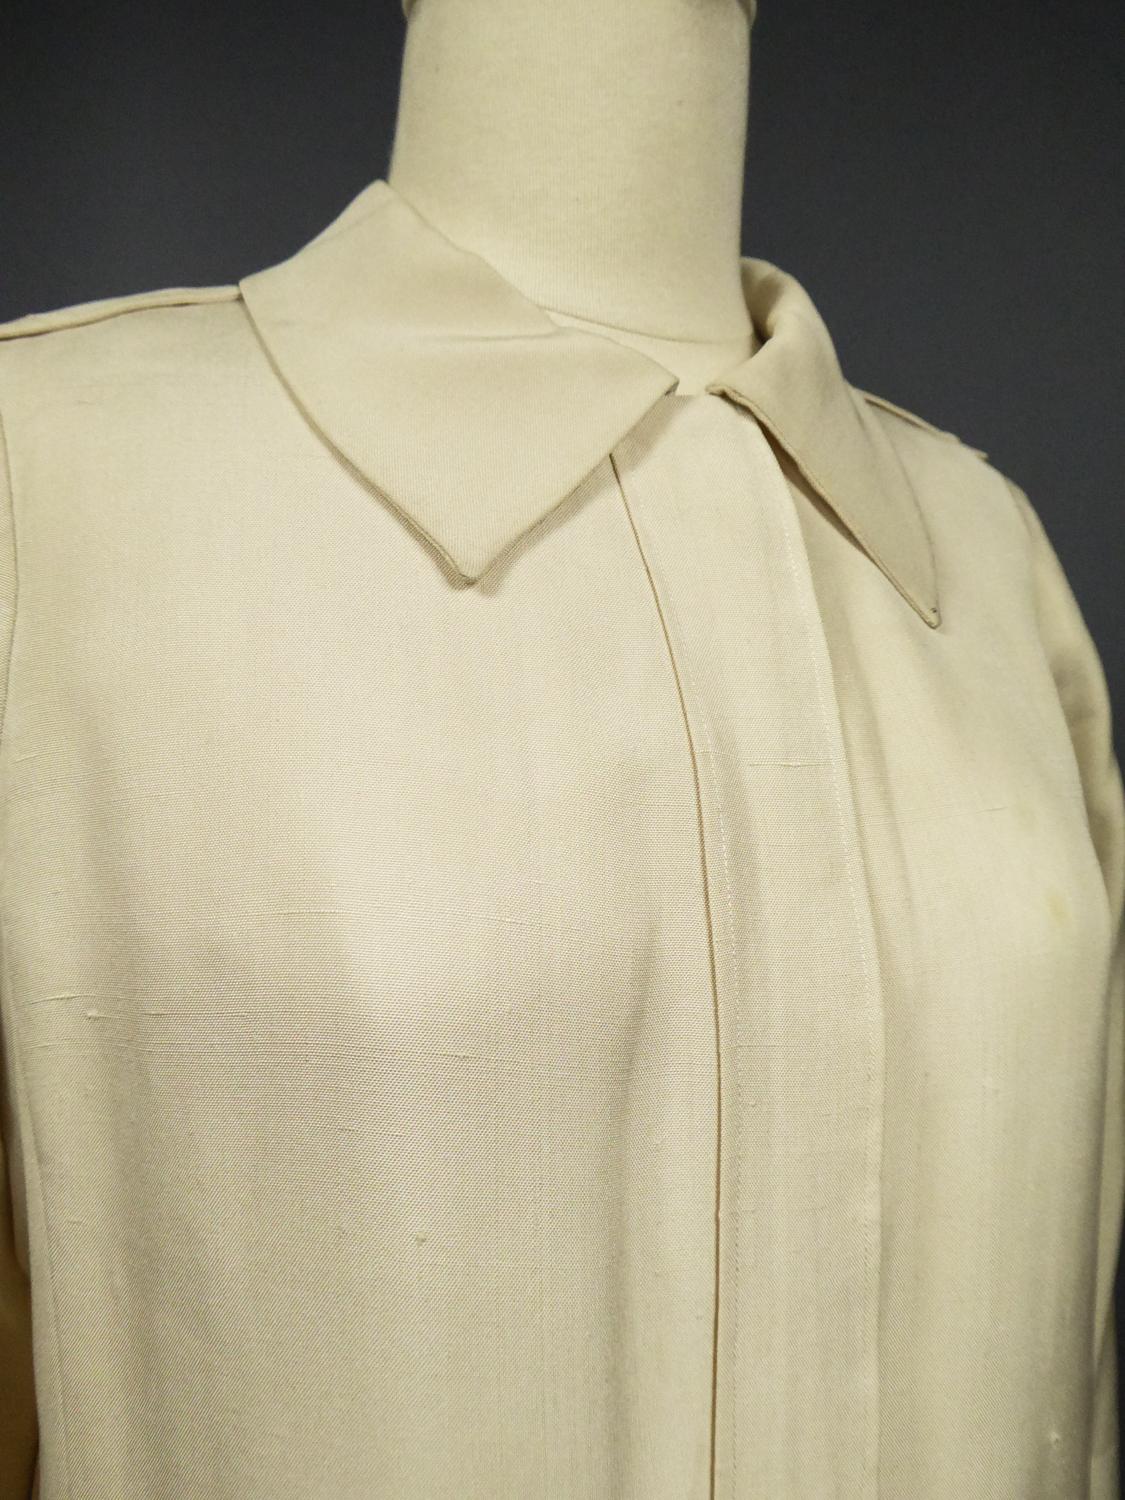 An Yves Saint Laurent Cocktail Dress Numbered 15193 - 1965 Collection 7